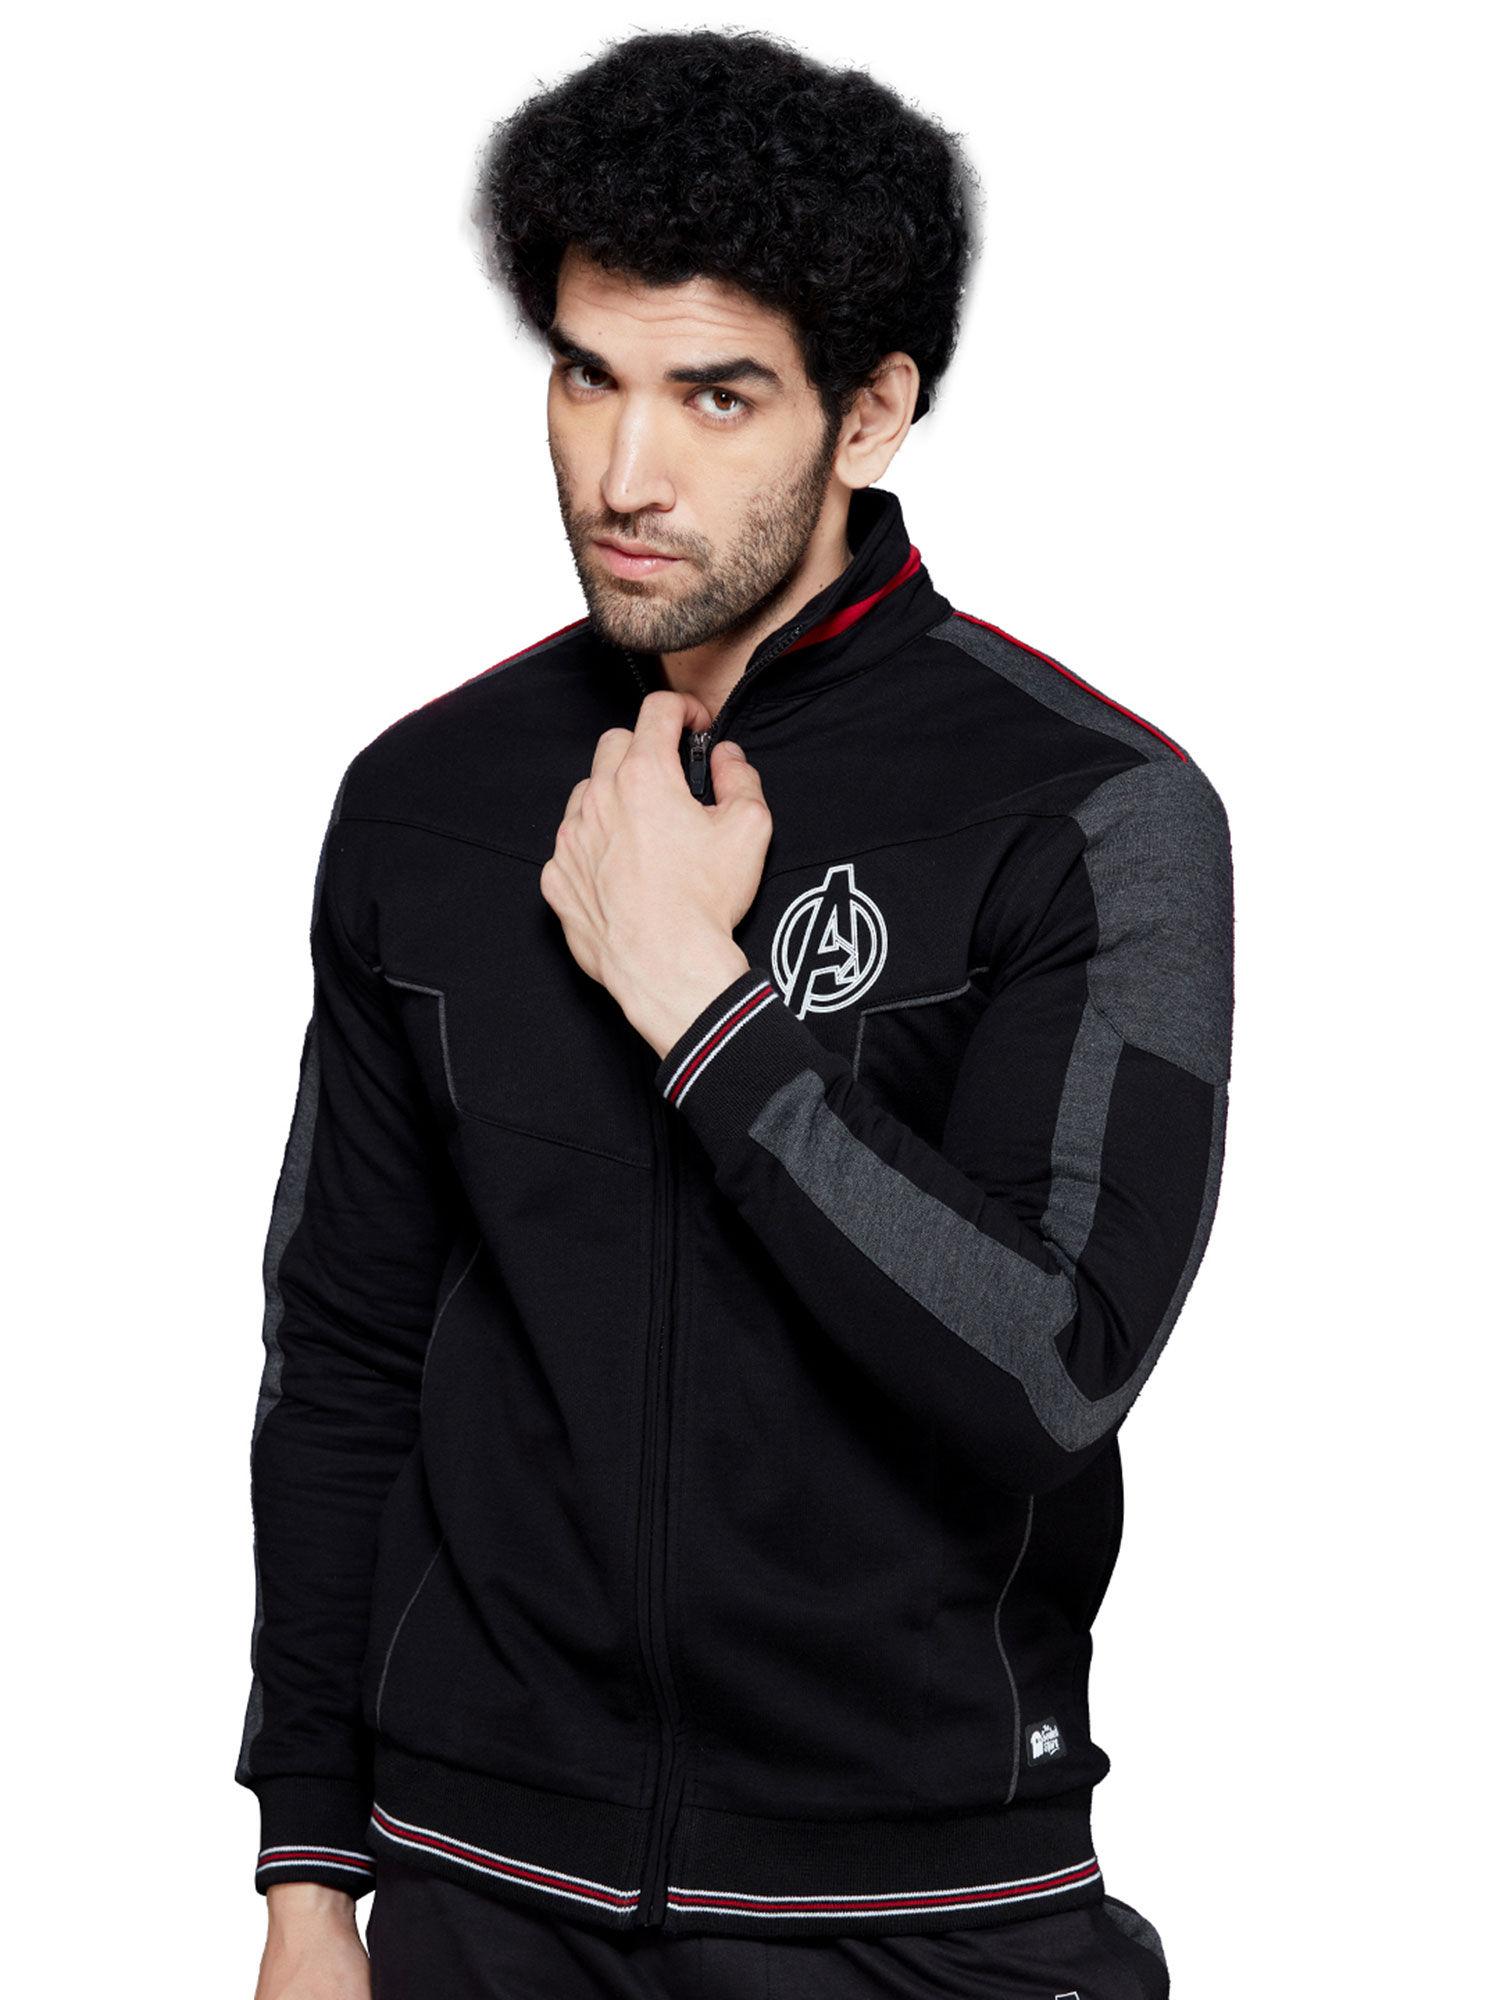 official-avengers-logo-jackets-for-mens